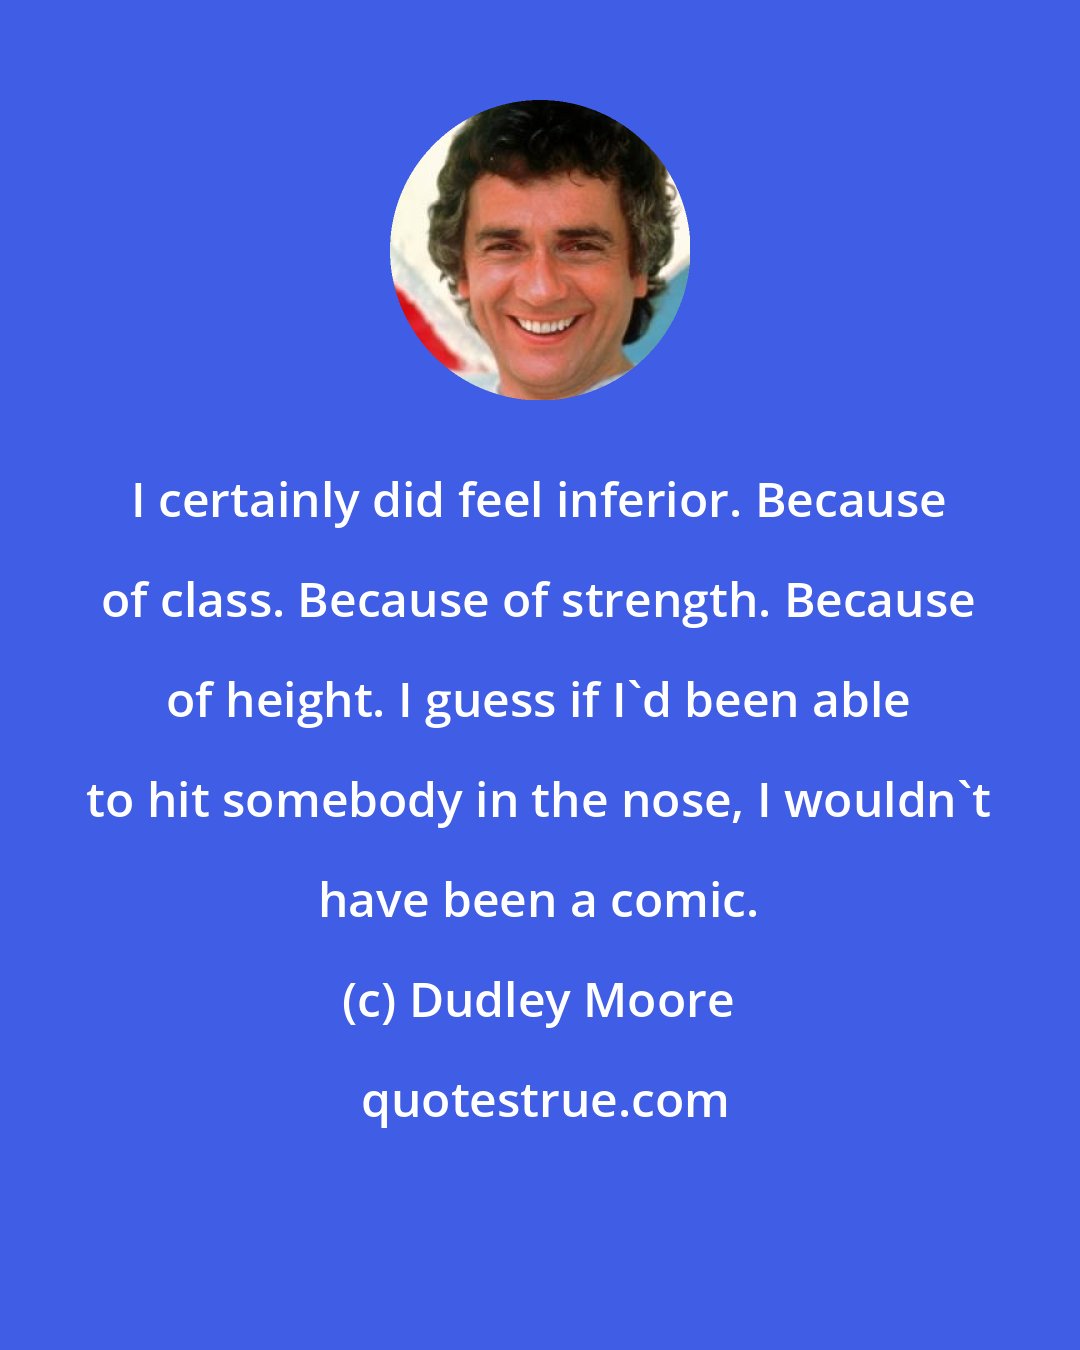 Dudley Moore: I certainly did feel inferior. Because of class. Because of strength. Because of height. I guess if I'd been able to hit somebody in the nose, I wouldn't have been a comic.